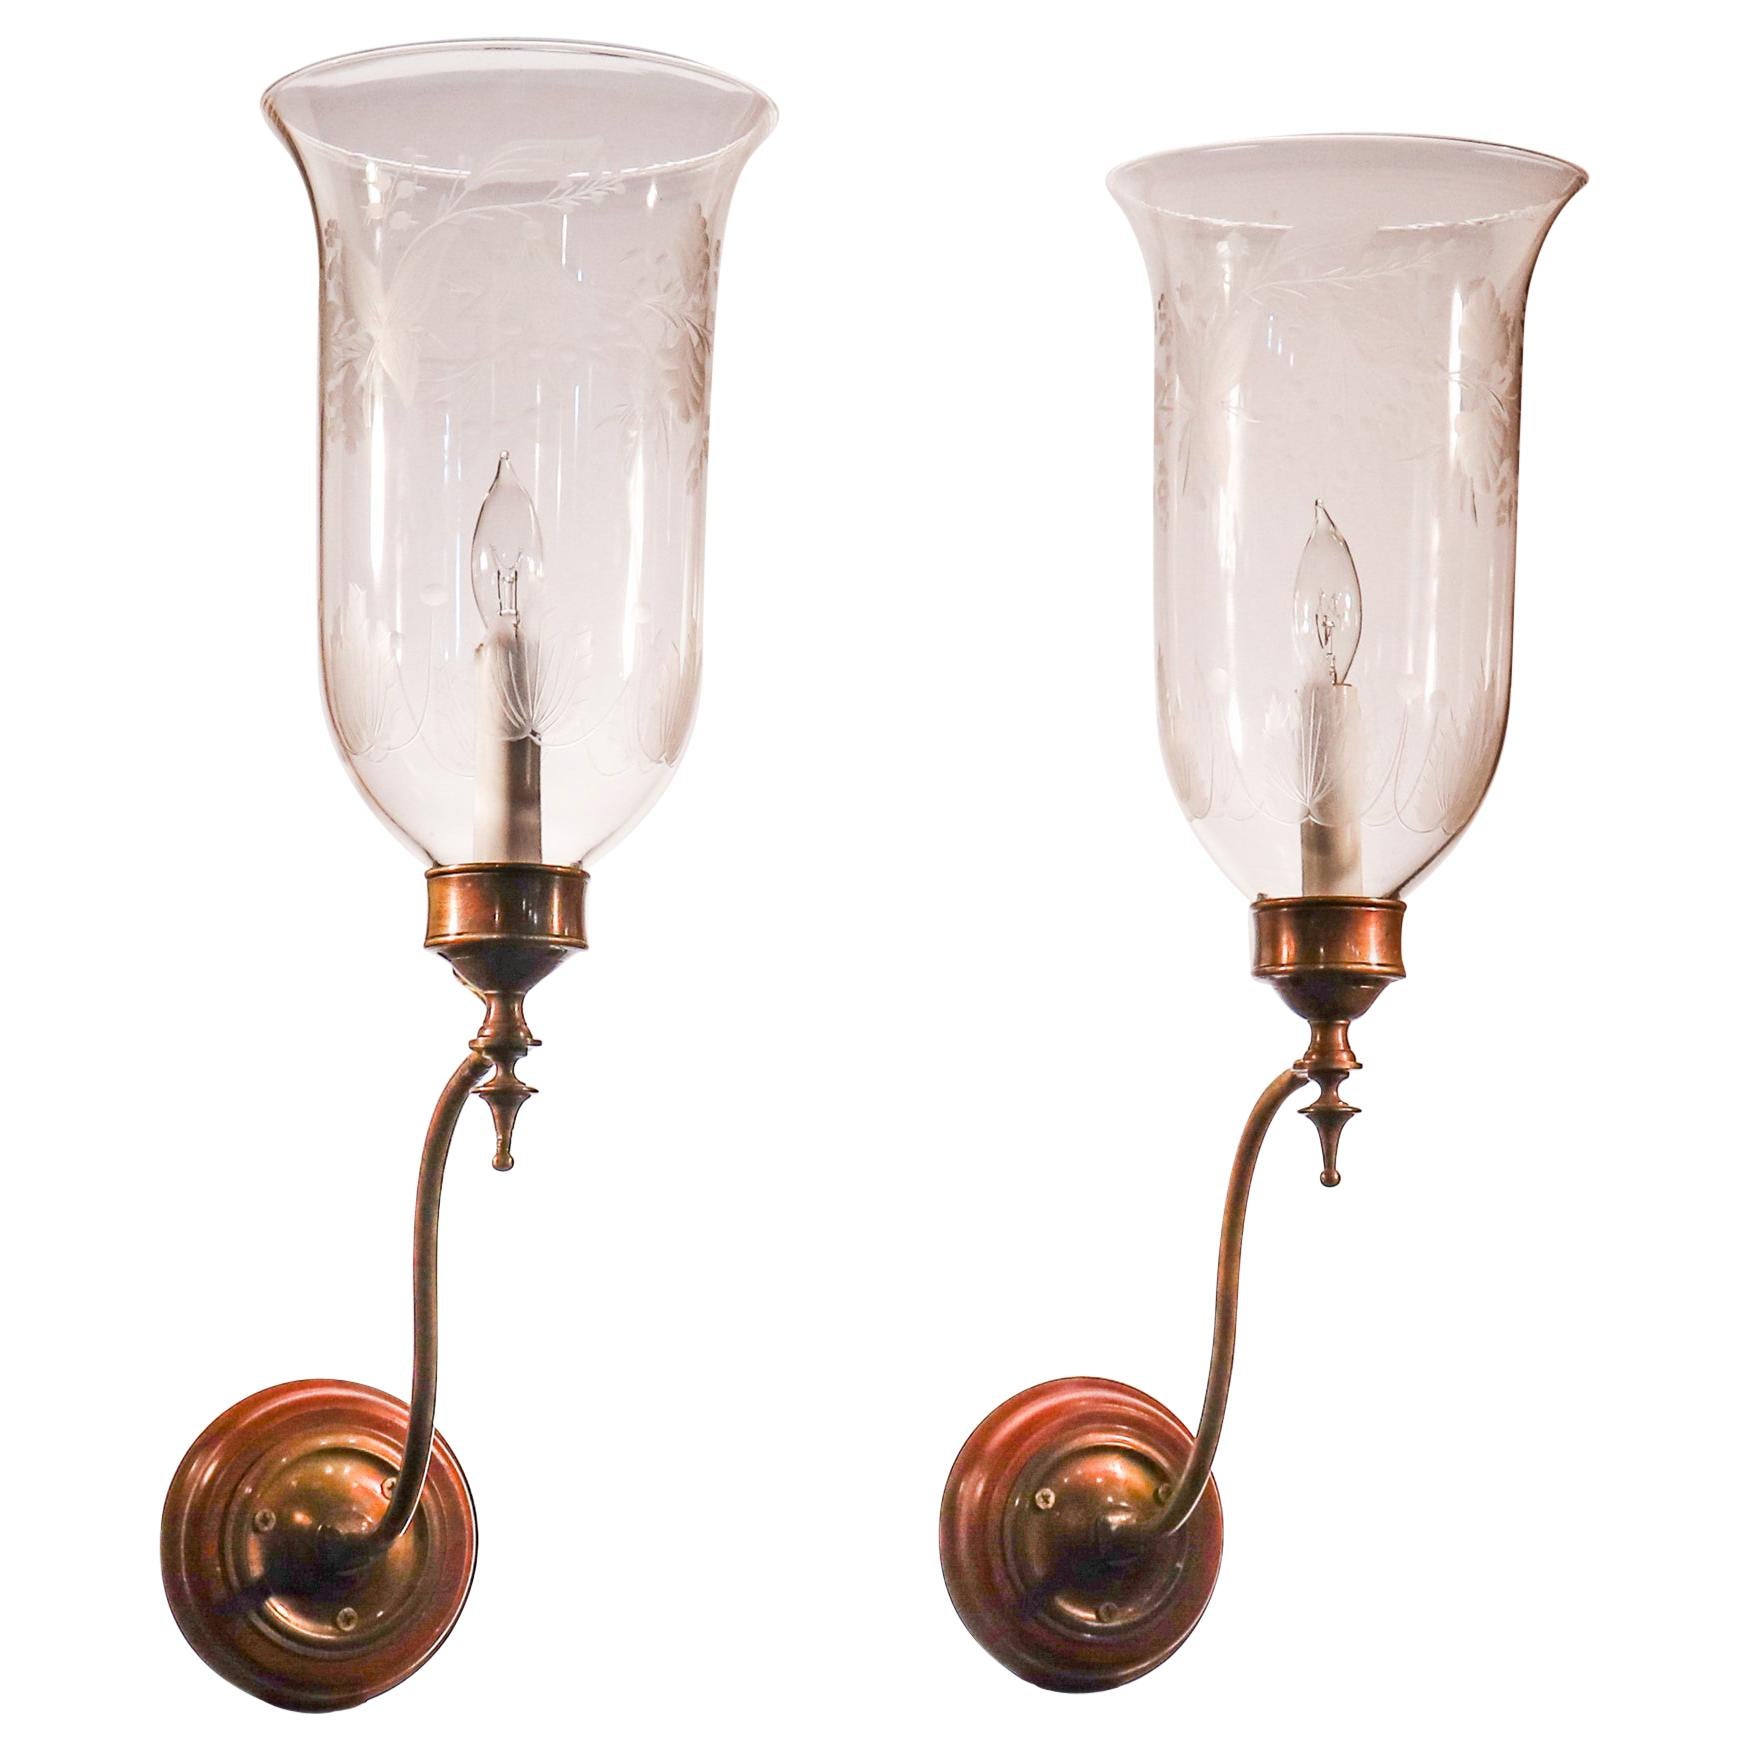 Pair of Antique English Hurricane Shade Wall Sconces